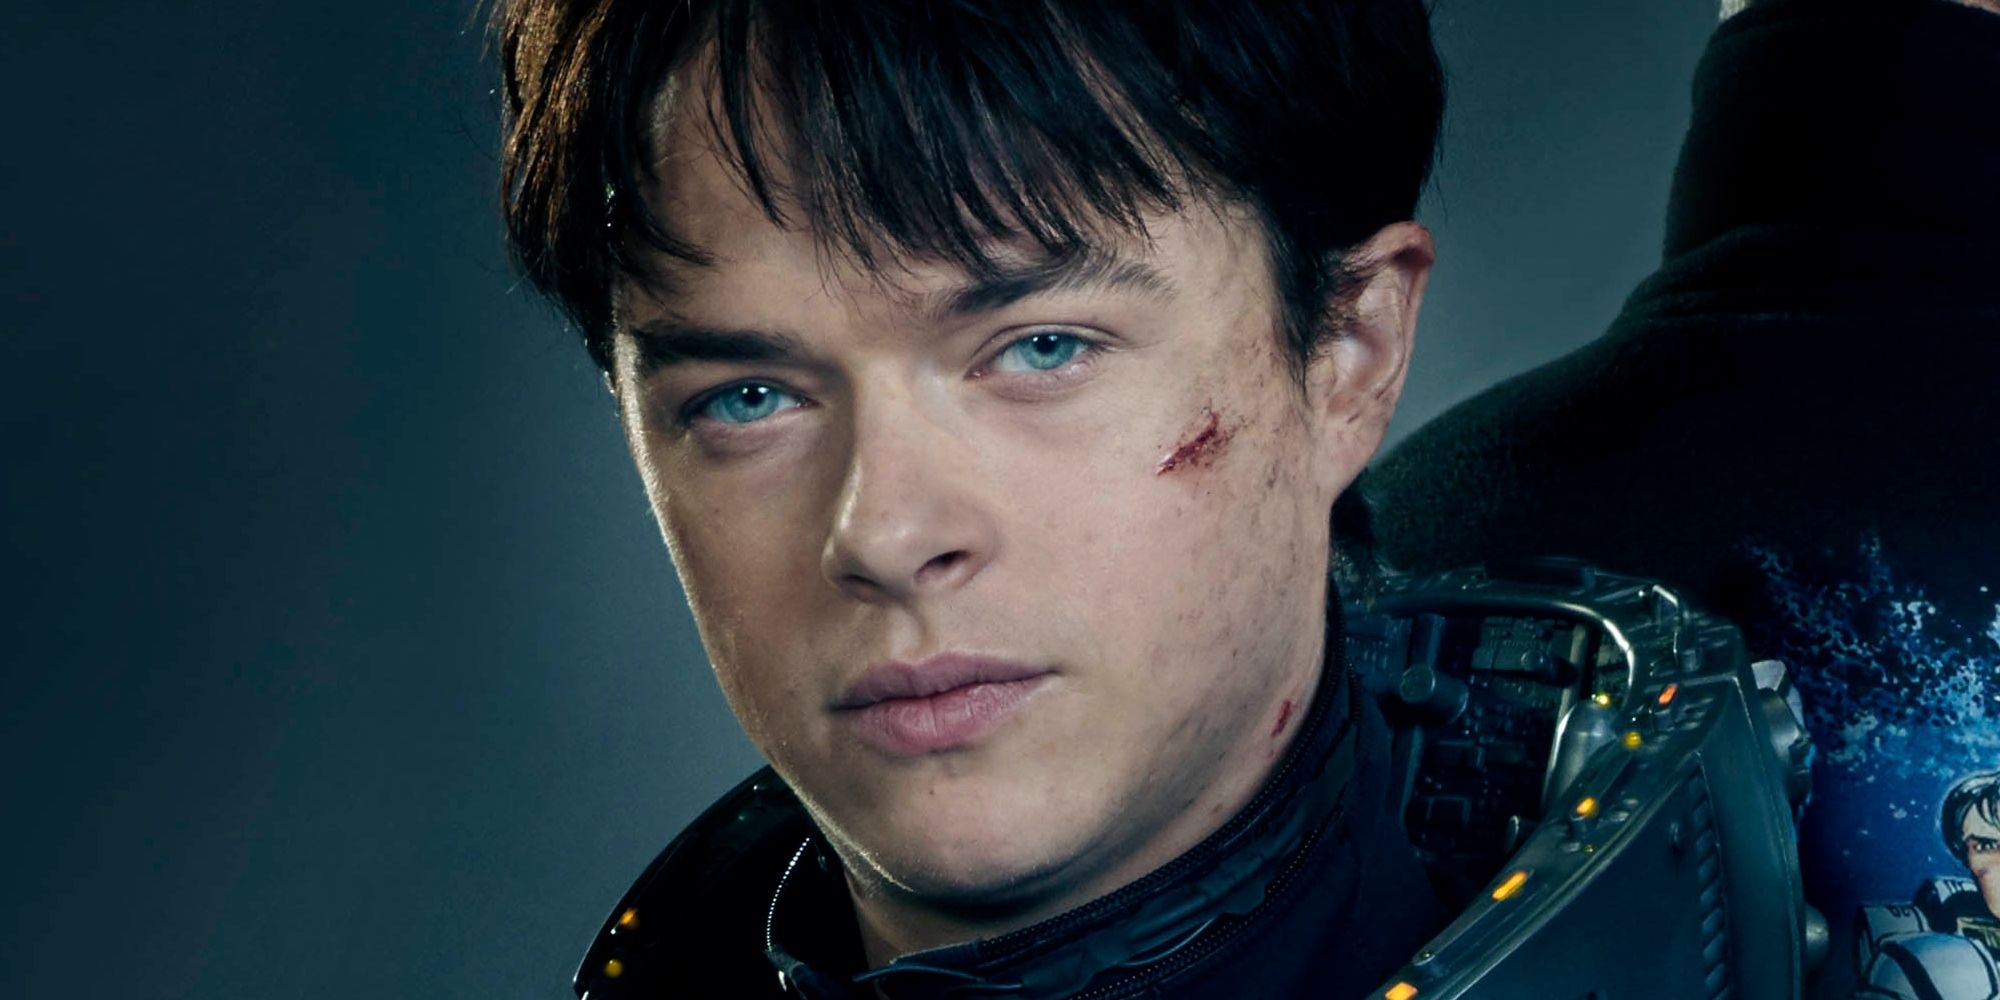 Valerian in a promotional image for Valerian and the City of a Thousand Planets